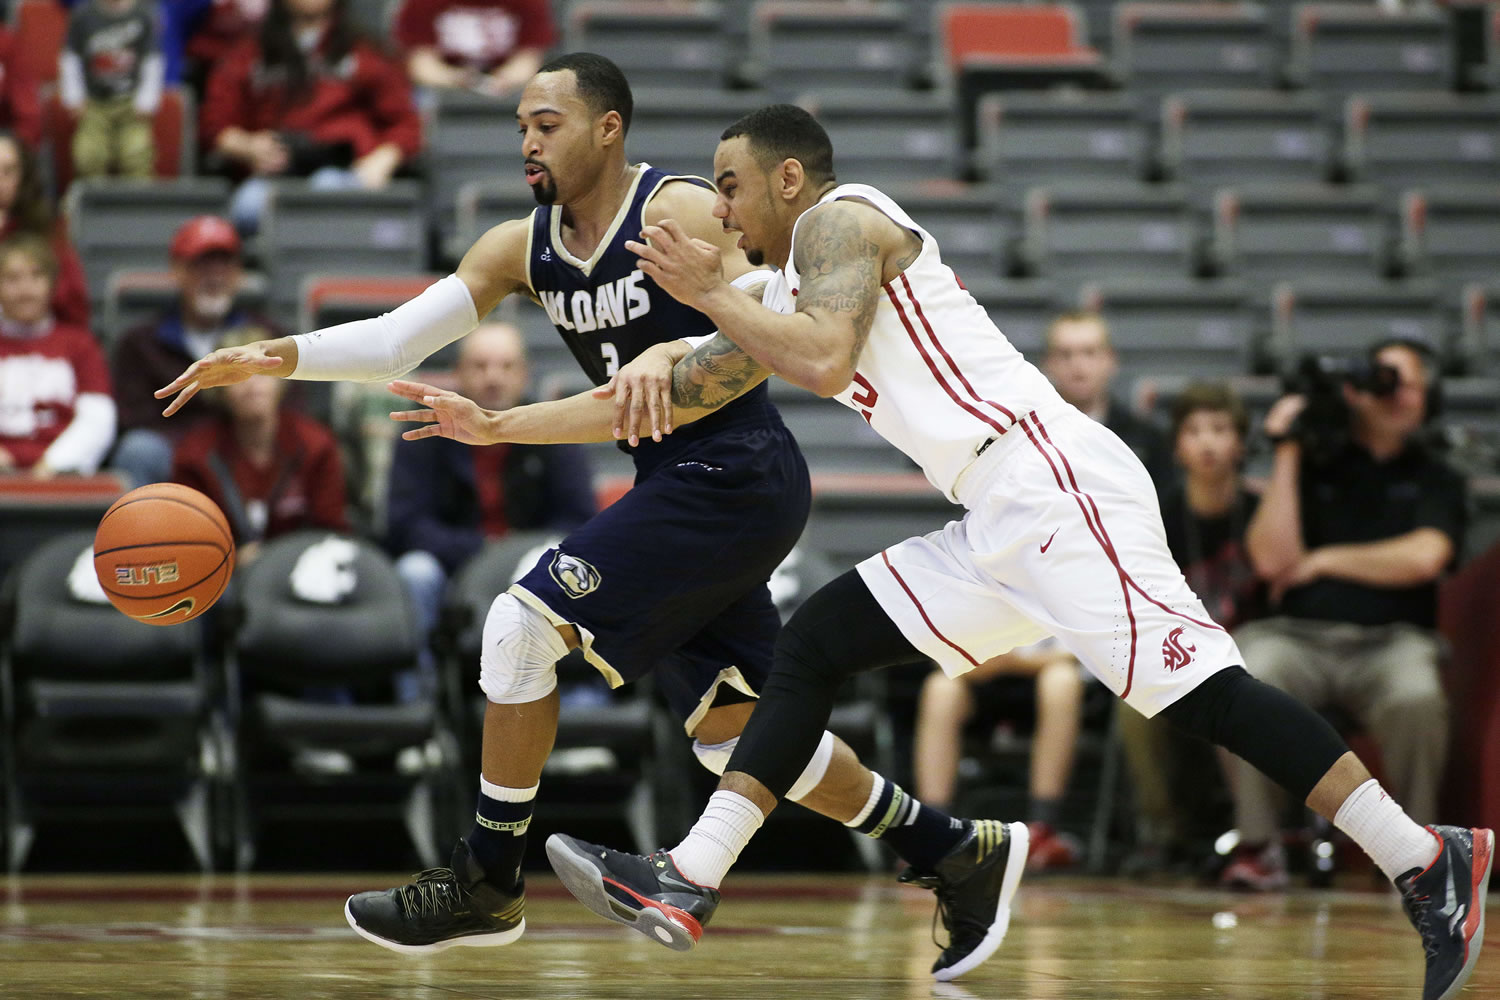 UC Davis' Corey Hawkins (3) and Washington State's DaVonte Lacy reach for a loose ball during the first half Sunday in Pullman.